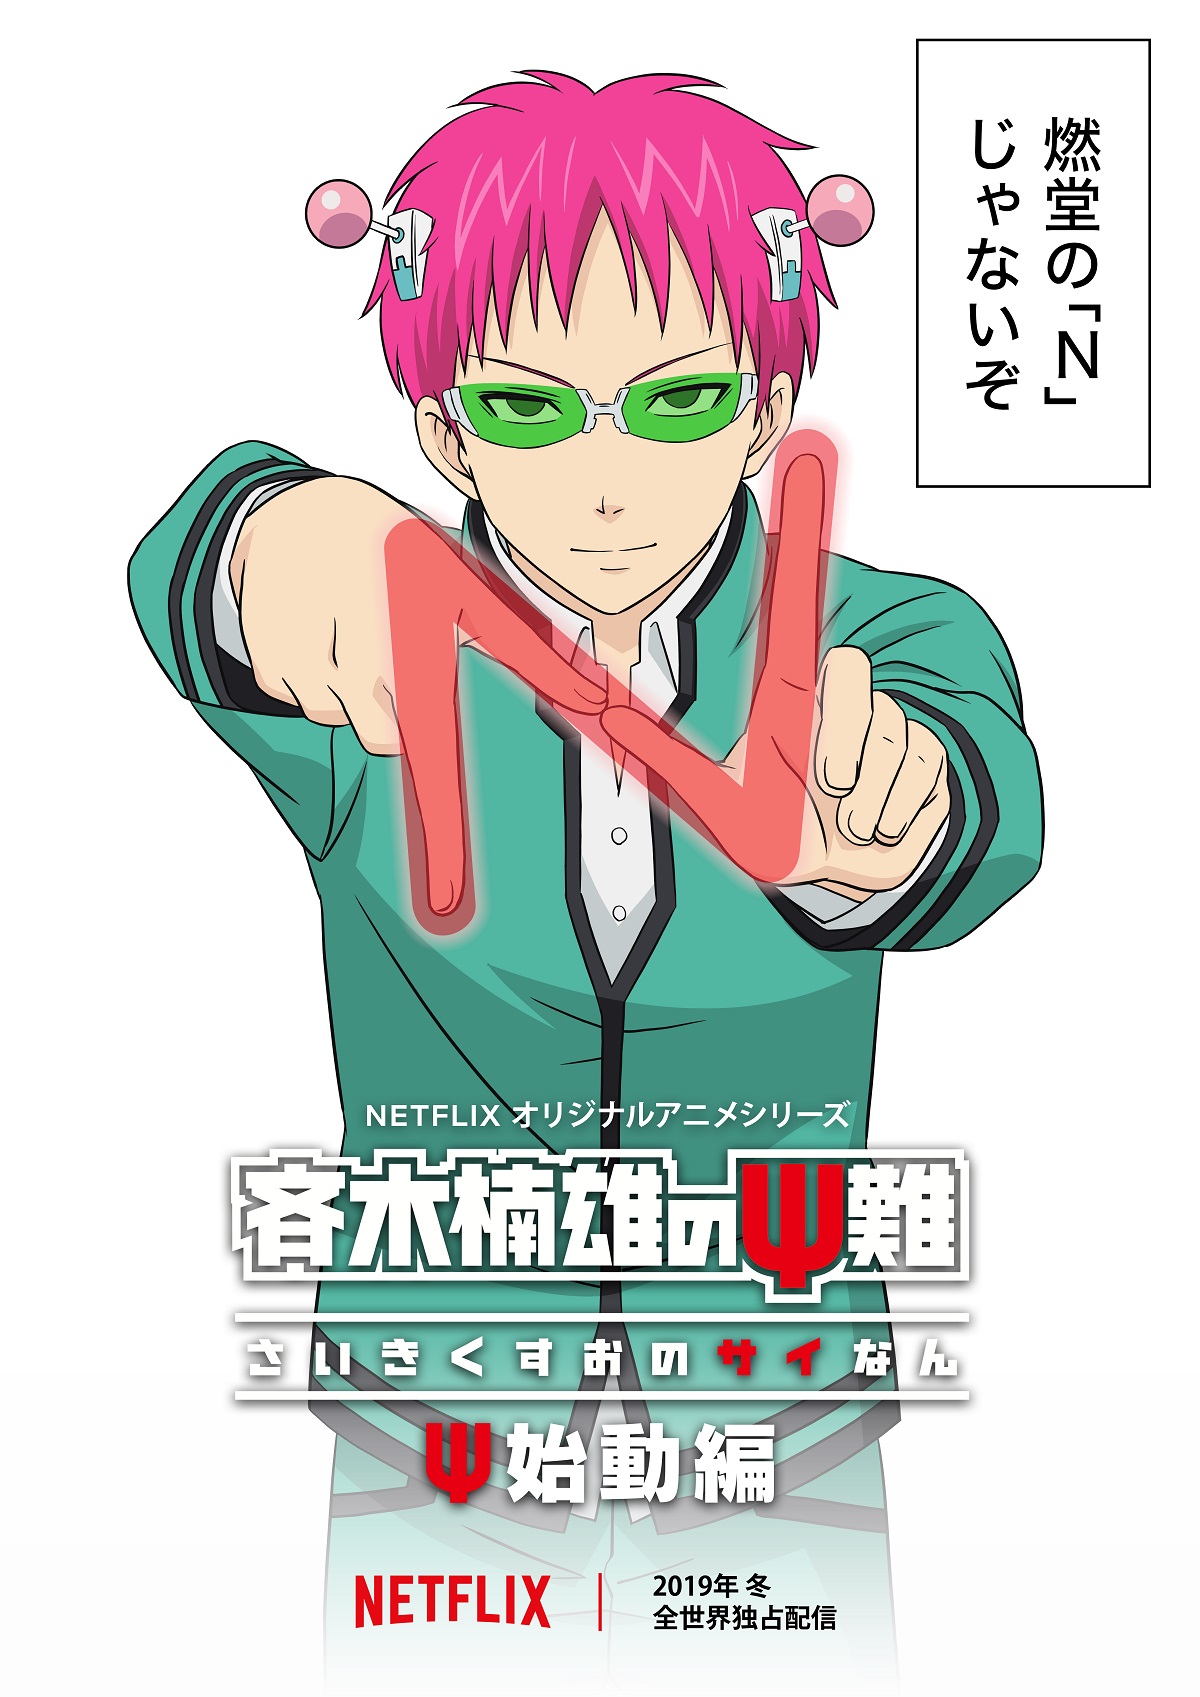 Making a meme out of every line in the Saiki K anime until Mob psycho 100  season 3 is announced Day 11  rSaikiK